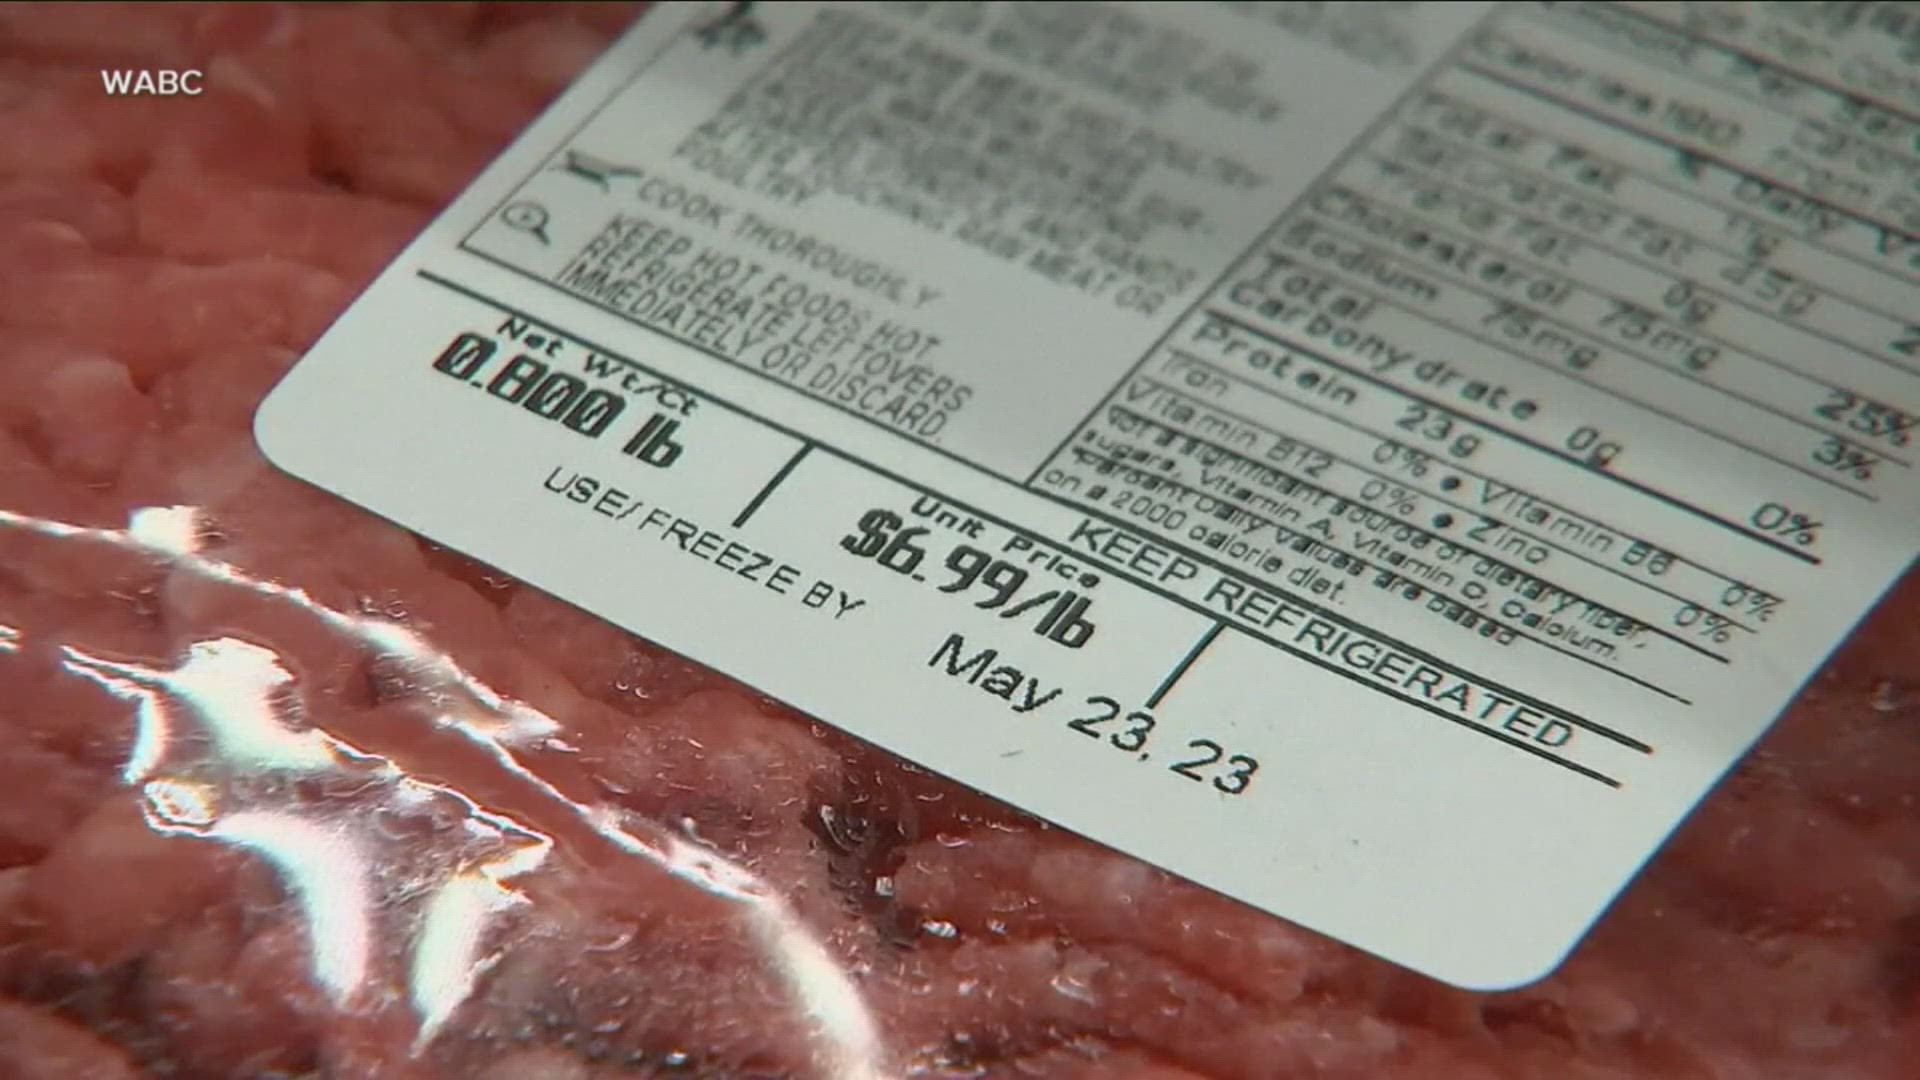 A New Jersey congressman is joining the call for a change in the expiration date system.